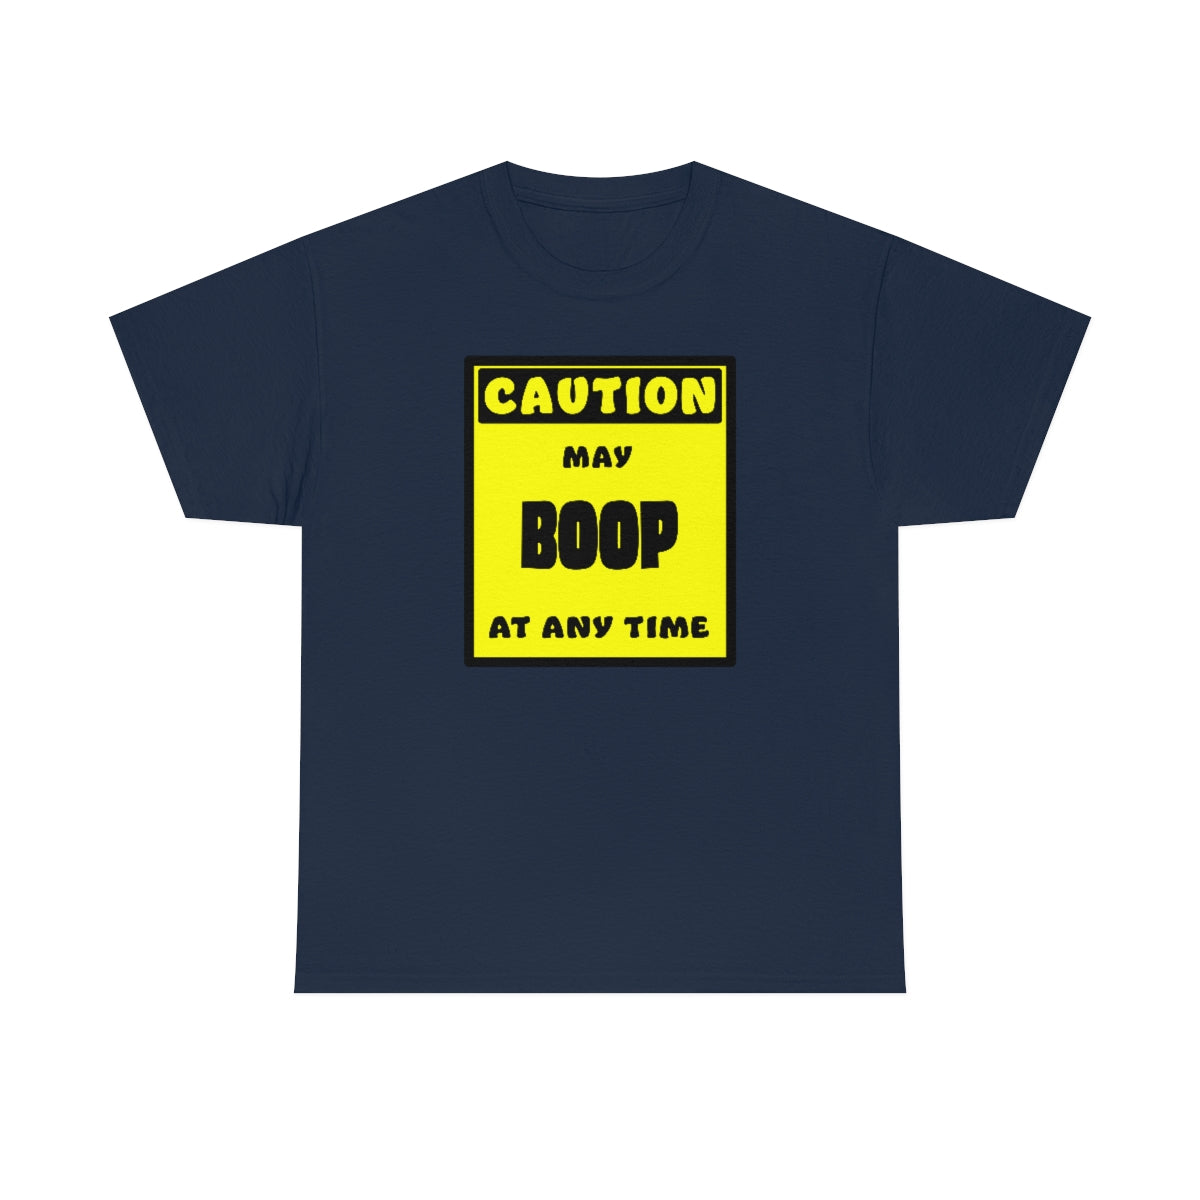 CAUTION! May BOOP at any time! - T-Shirt T-Shirt AFLT-Whootorca Navy Blue S 